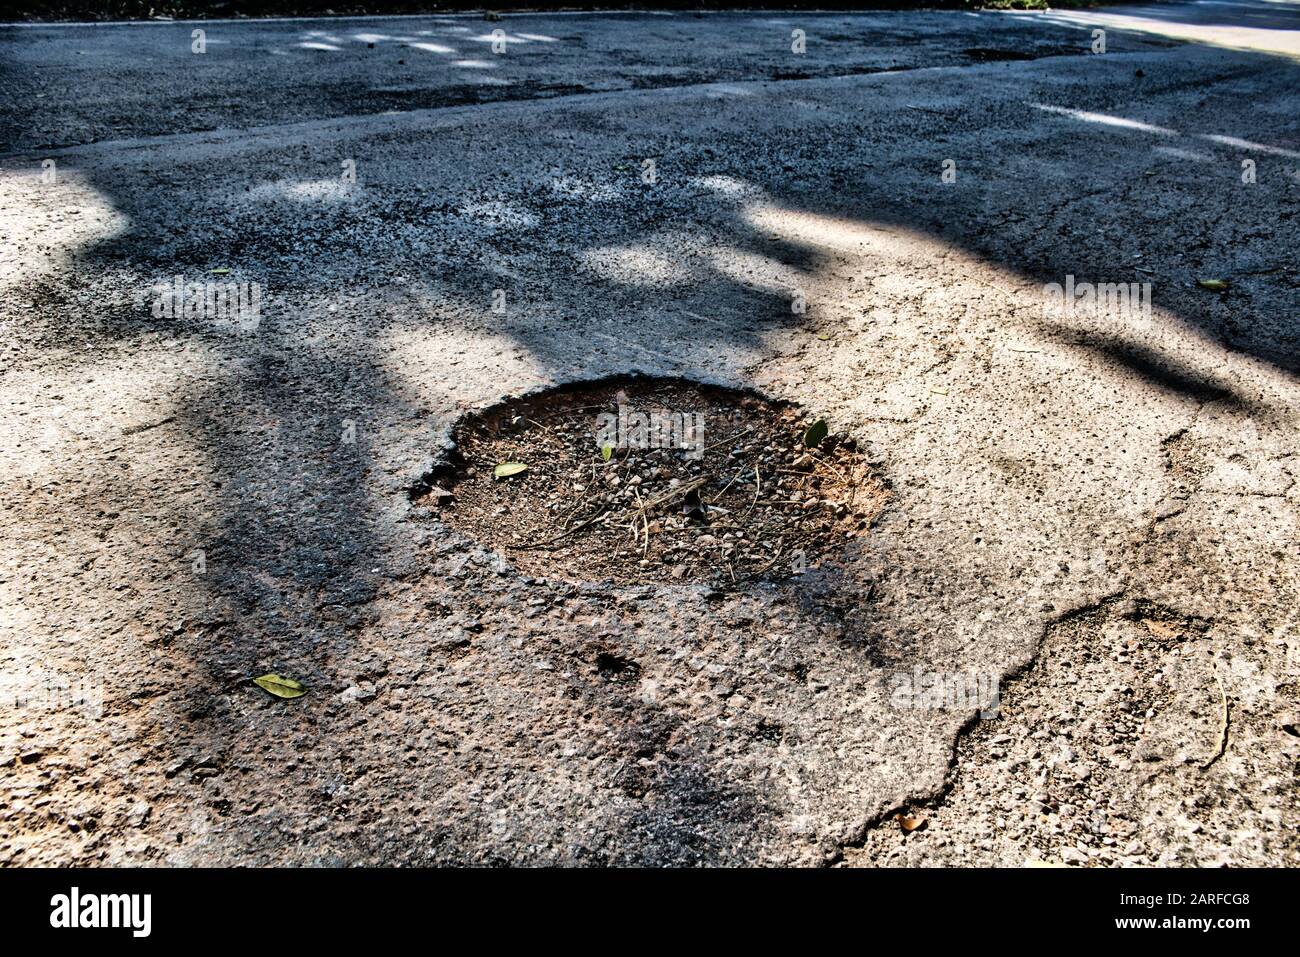 This unique photo shows a pothole in a gray paved road. As so often symbolizes caution and danger on the streets of thailand Stock Photo